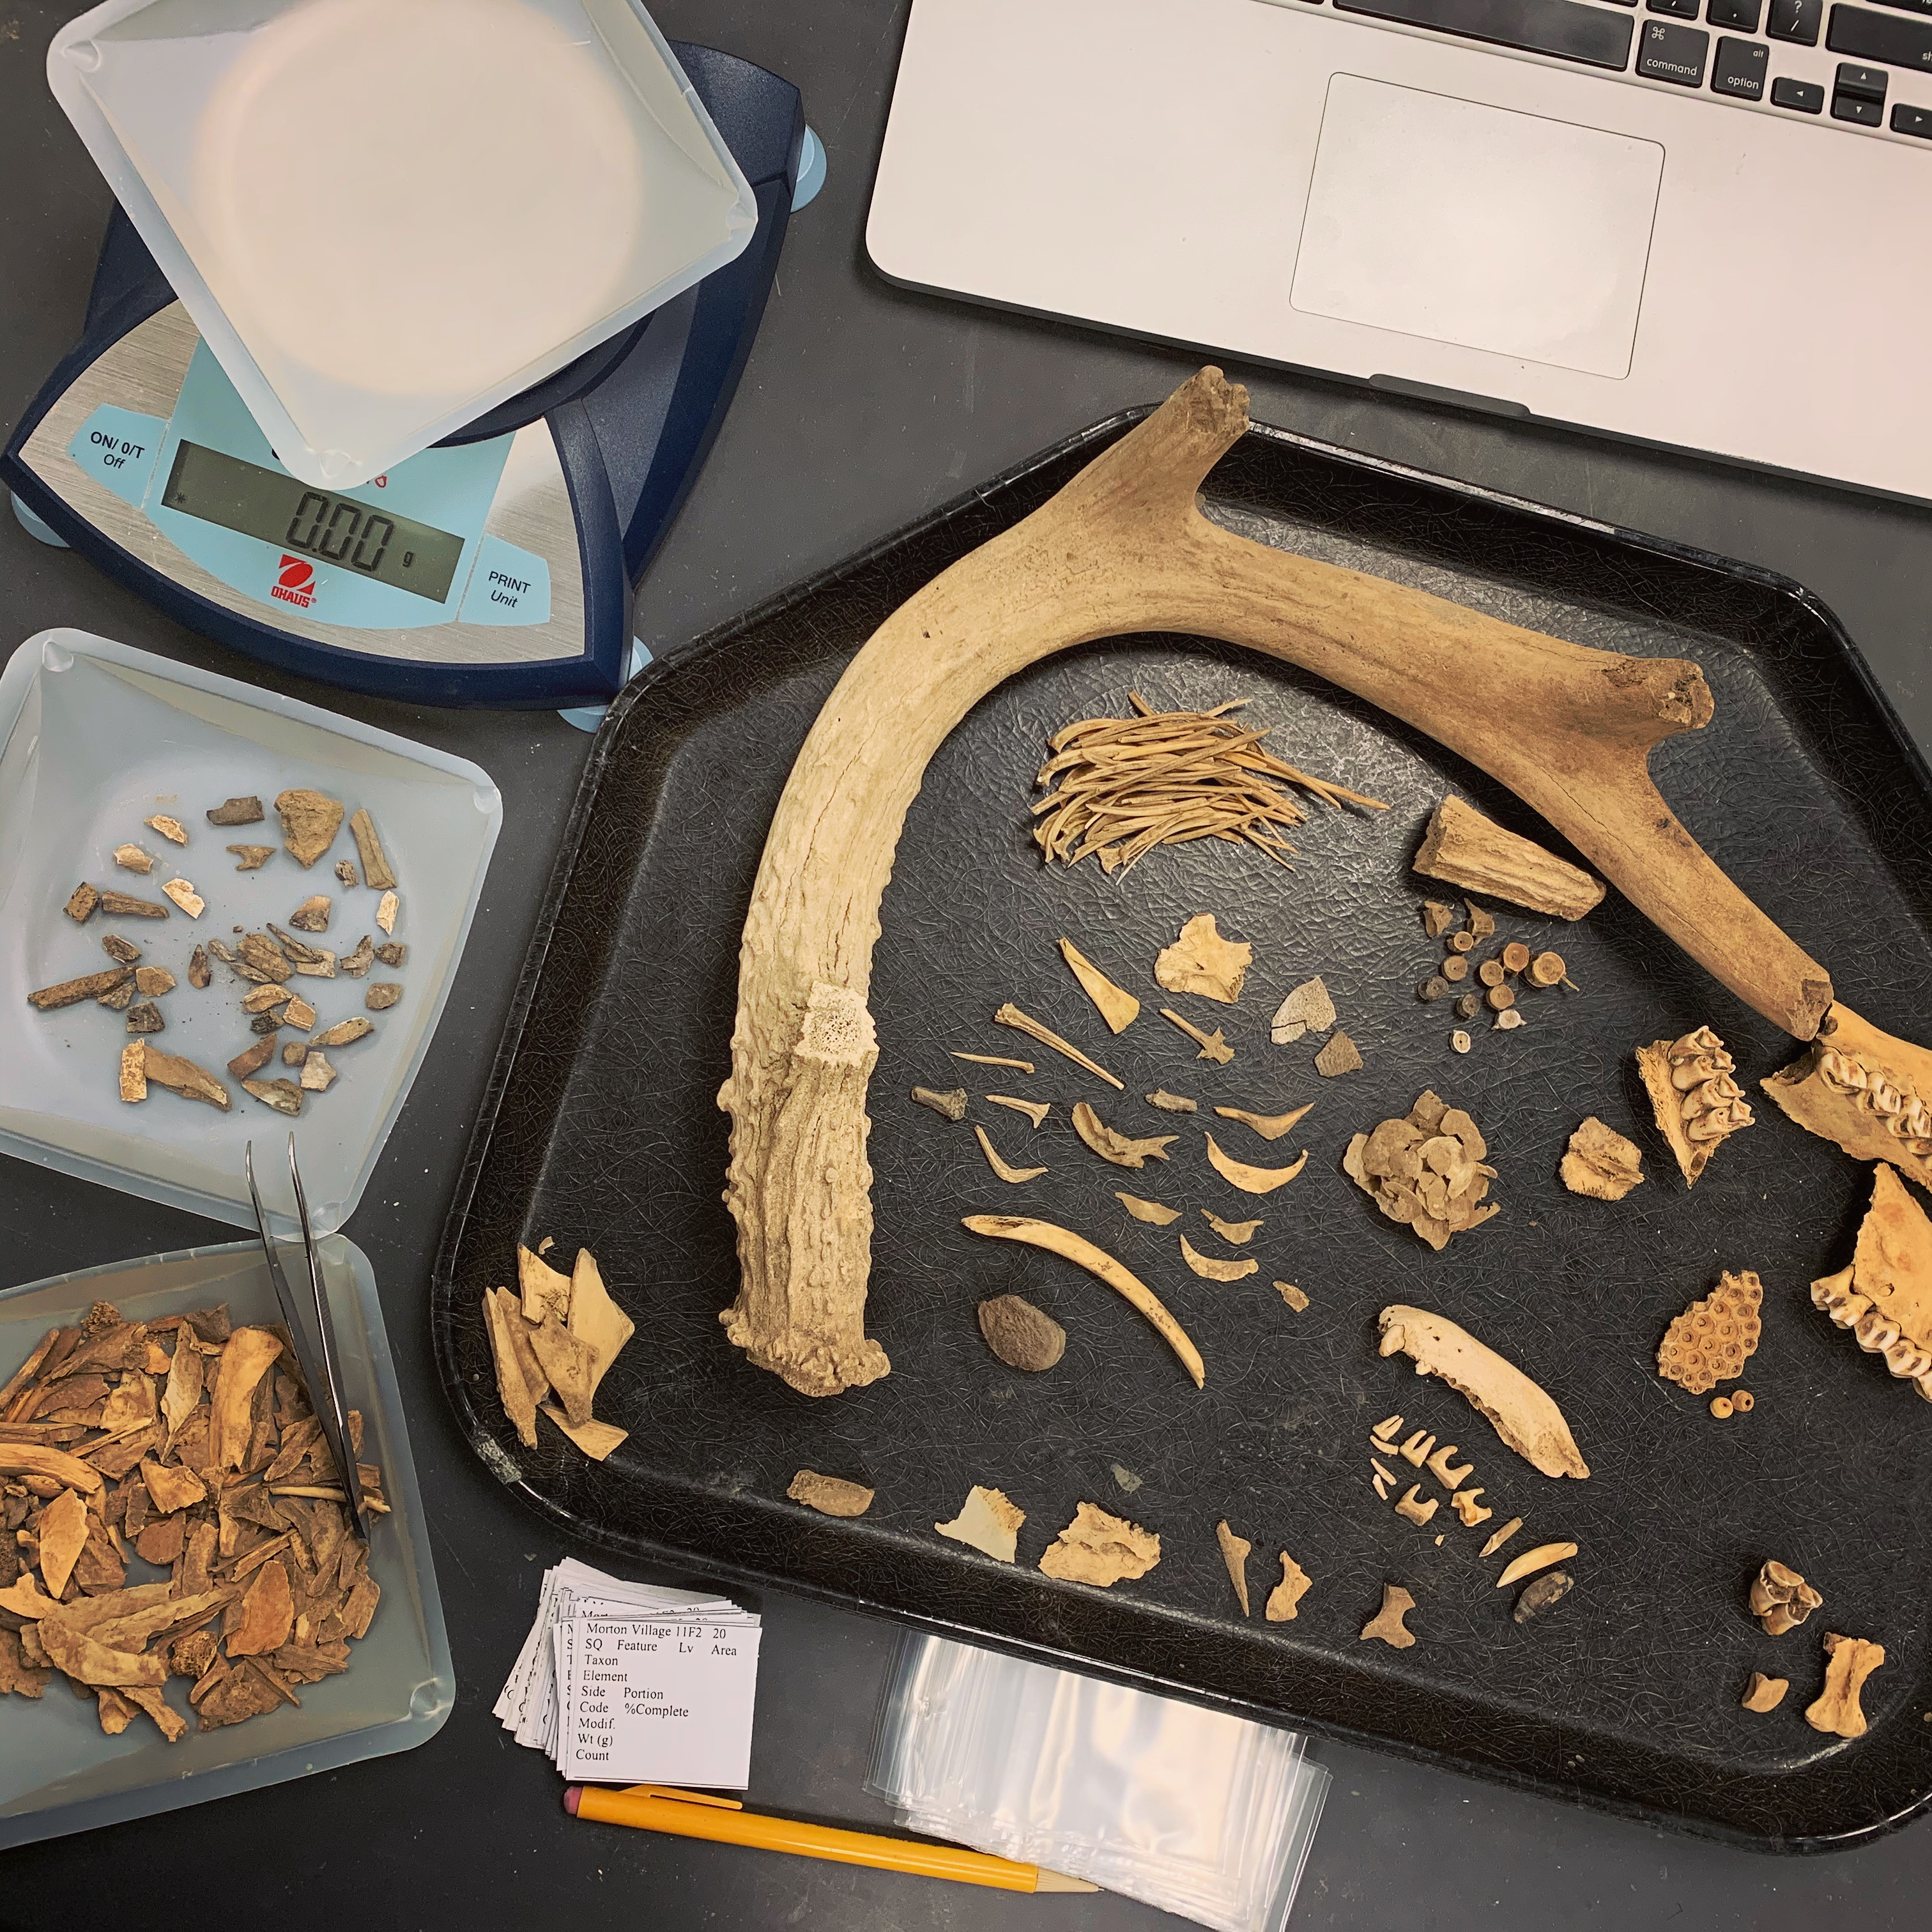 Black tray with small and large animal bones sitting next to a scale